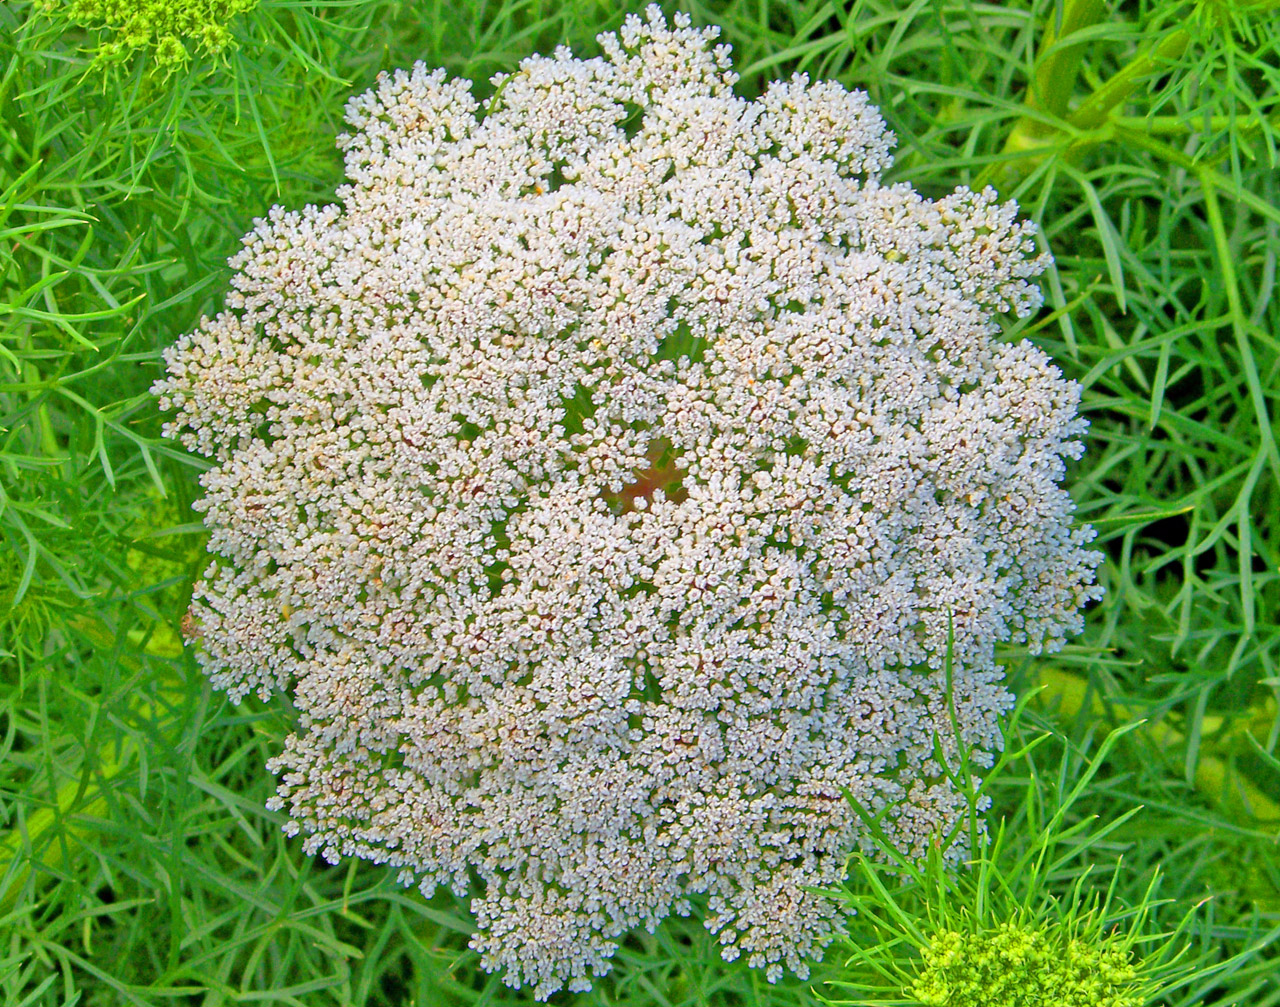 Queen Anne's lace weed